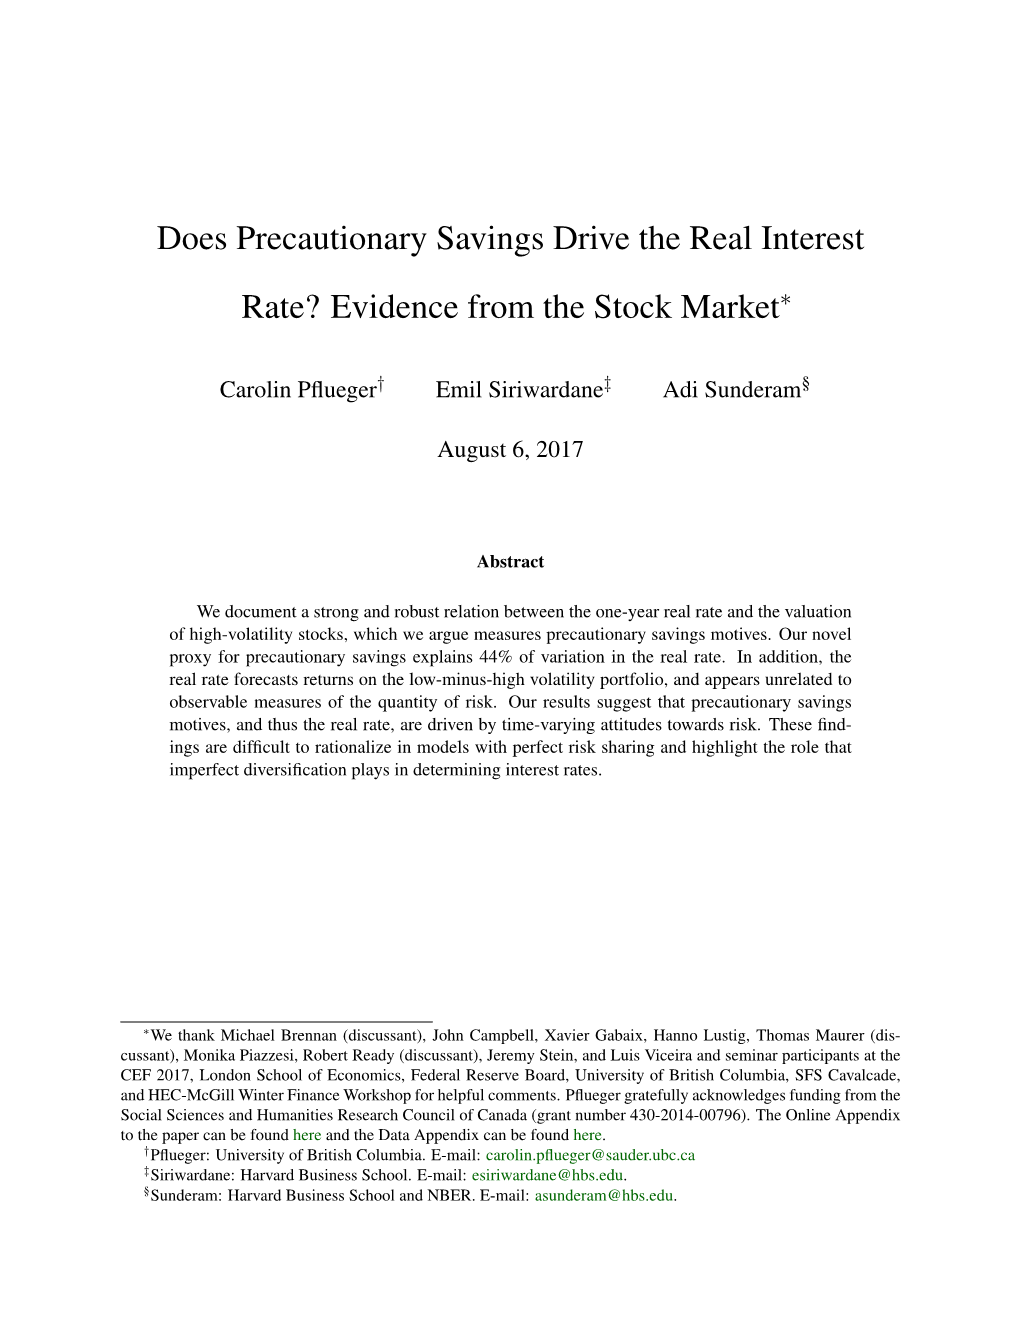 Does Precautionary Savings Drive the Real Interest Rate? Evidence from the Stock Market∗